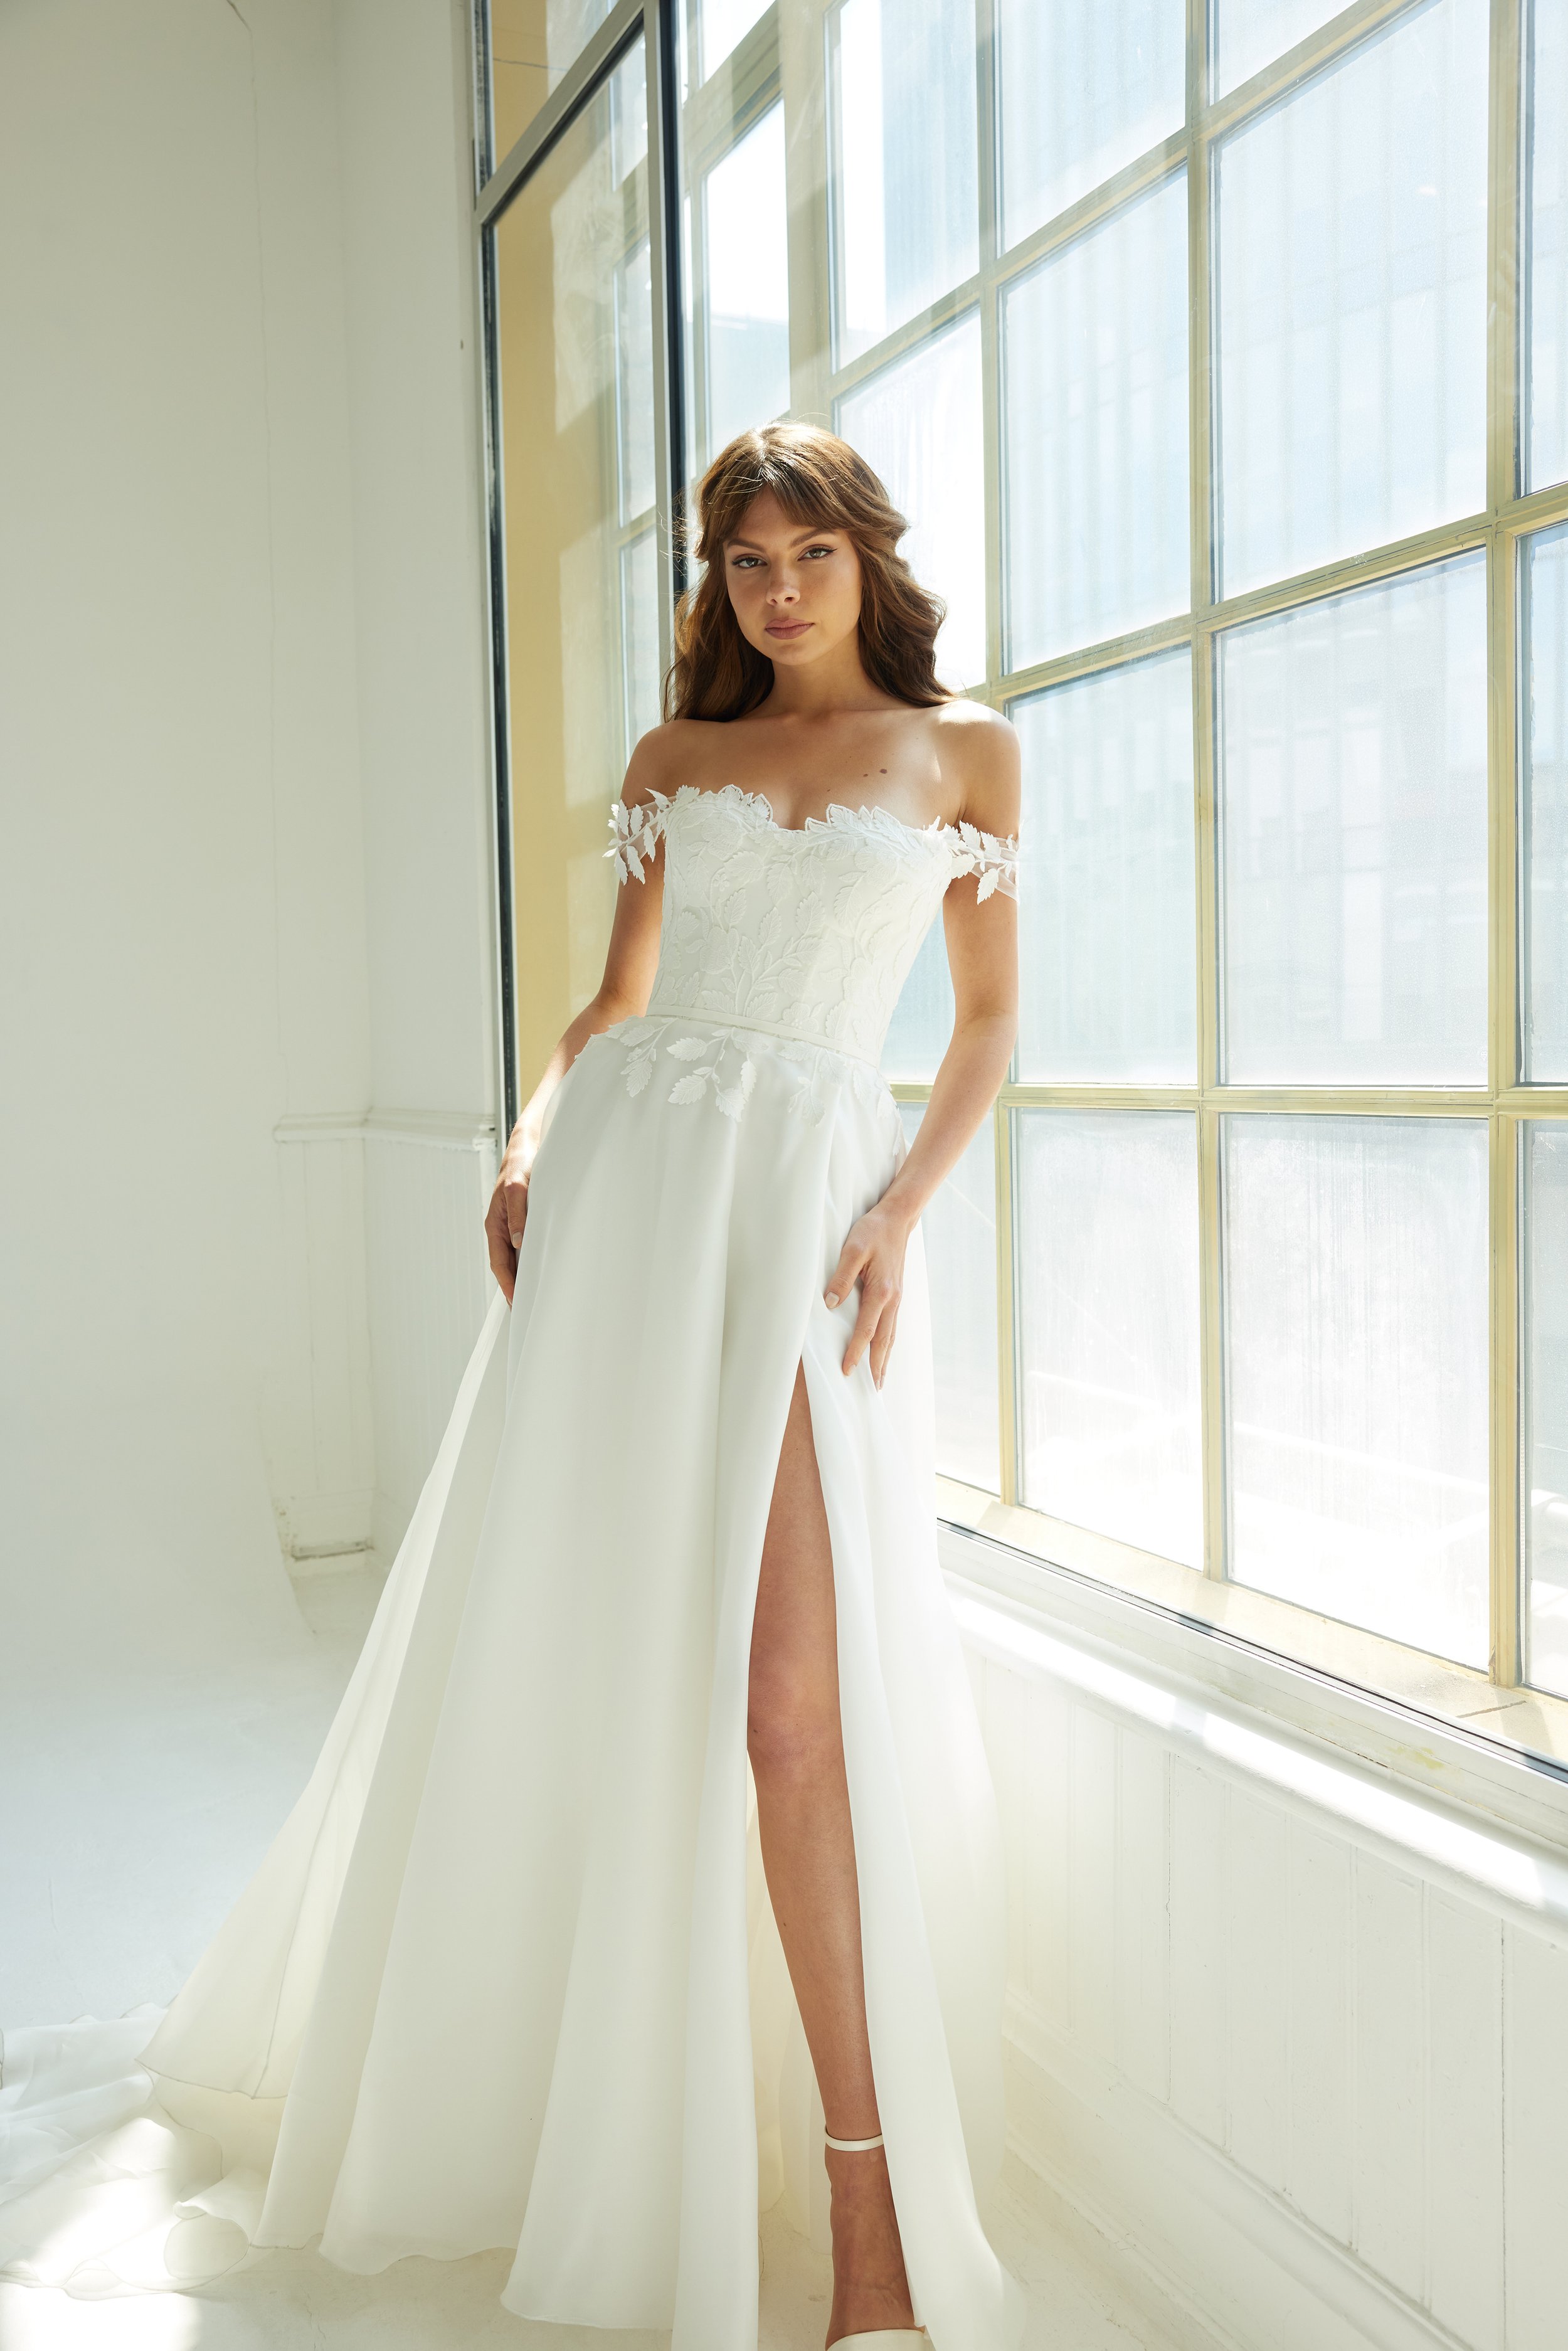 Thalasso Suzanne Neville at Frances Day Bridal  2